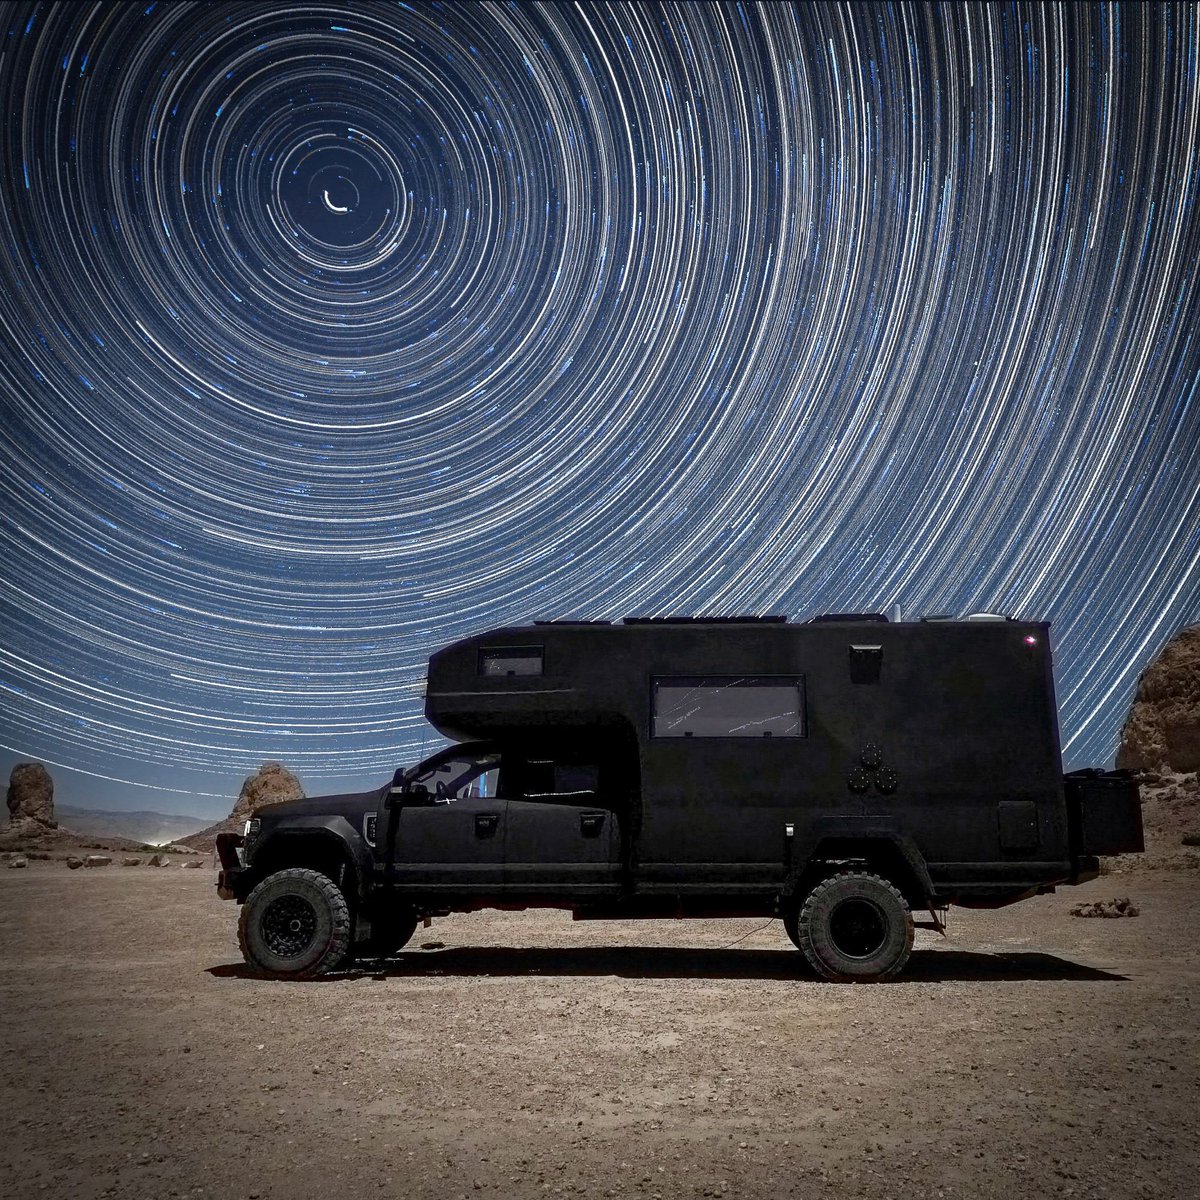 Happy Eclipse Day! Where are you watching the big event today? · · · #earthroamer #offroad4x4 #expeditionvehicle #campinglife #overlanding #4x4life #4x4trucks #vanlife #vanlifeadventures